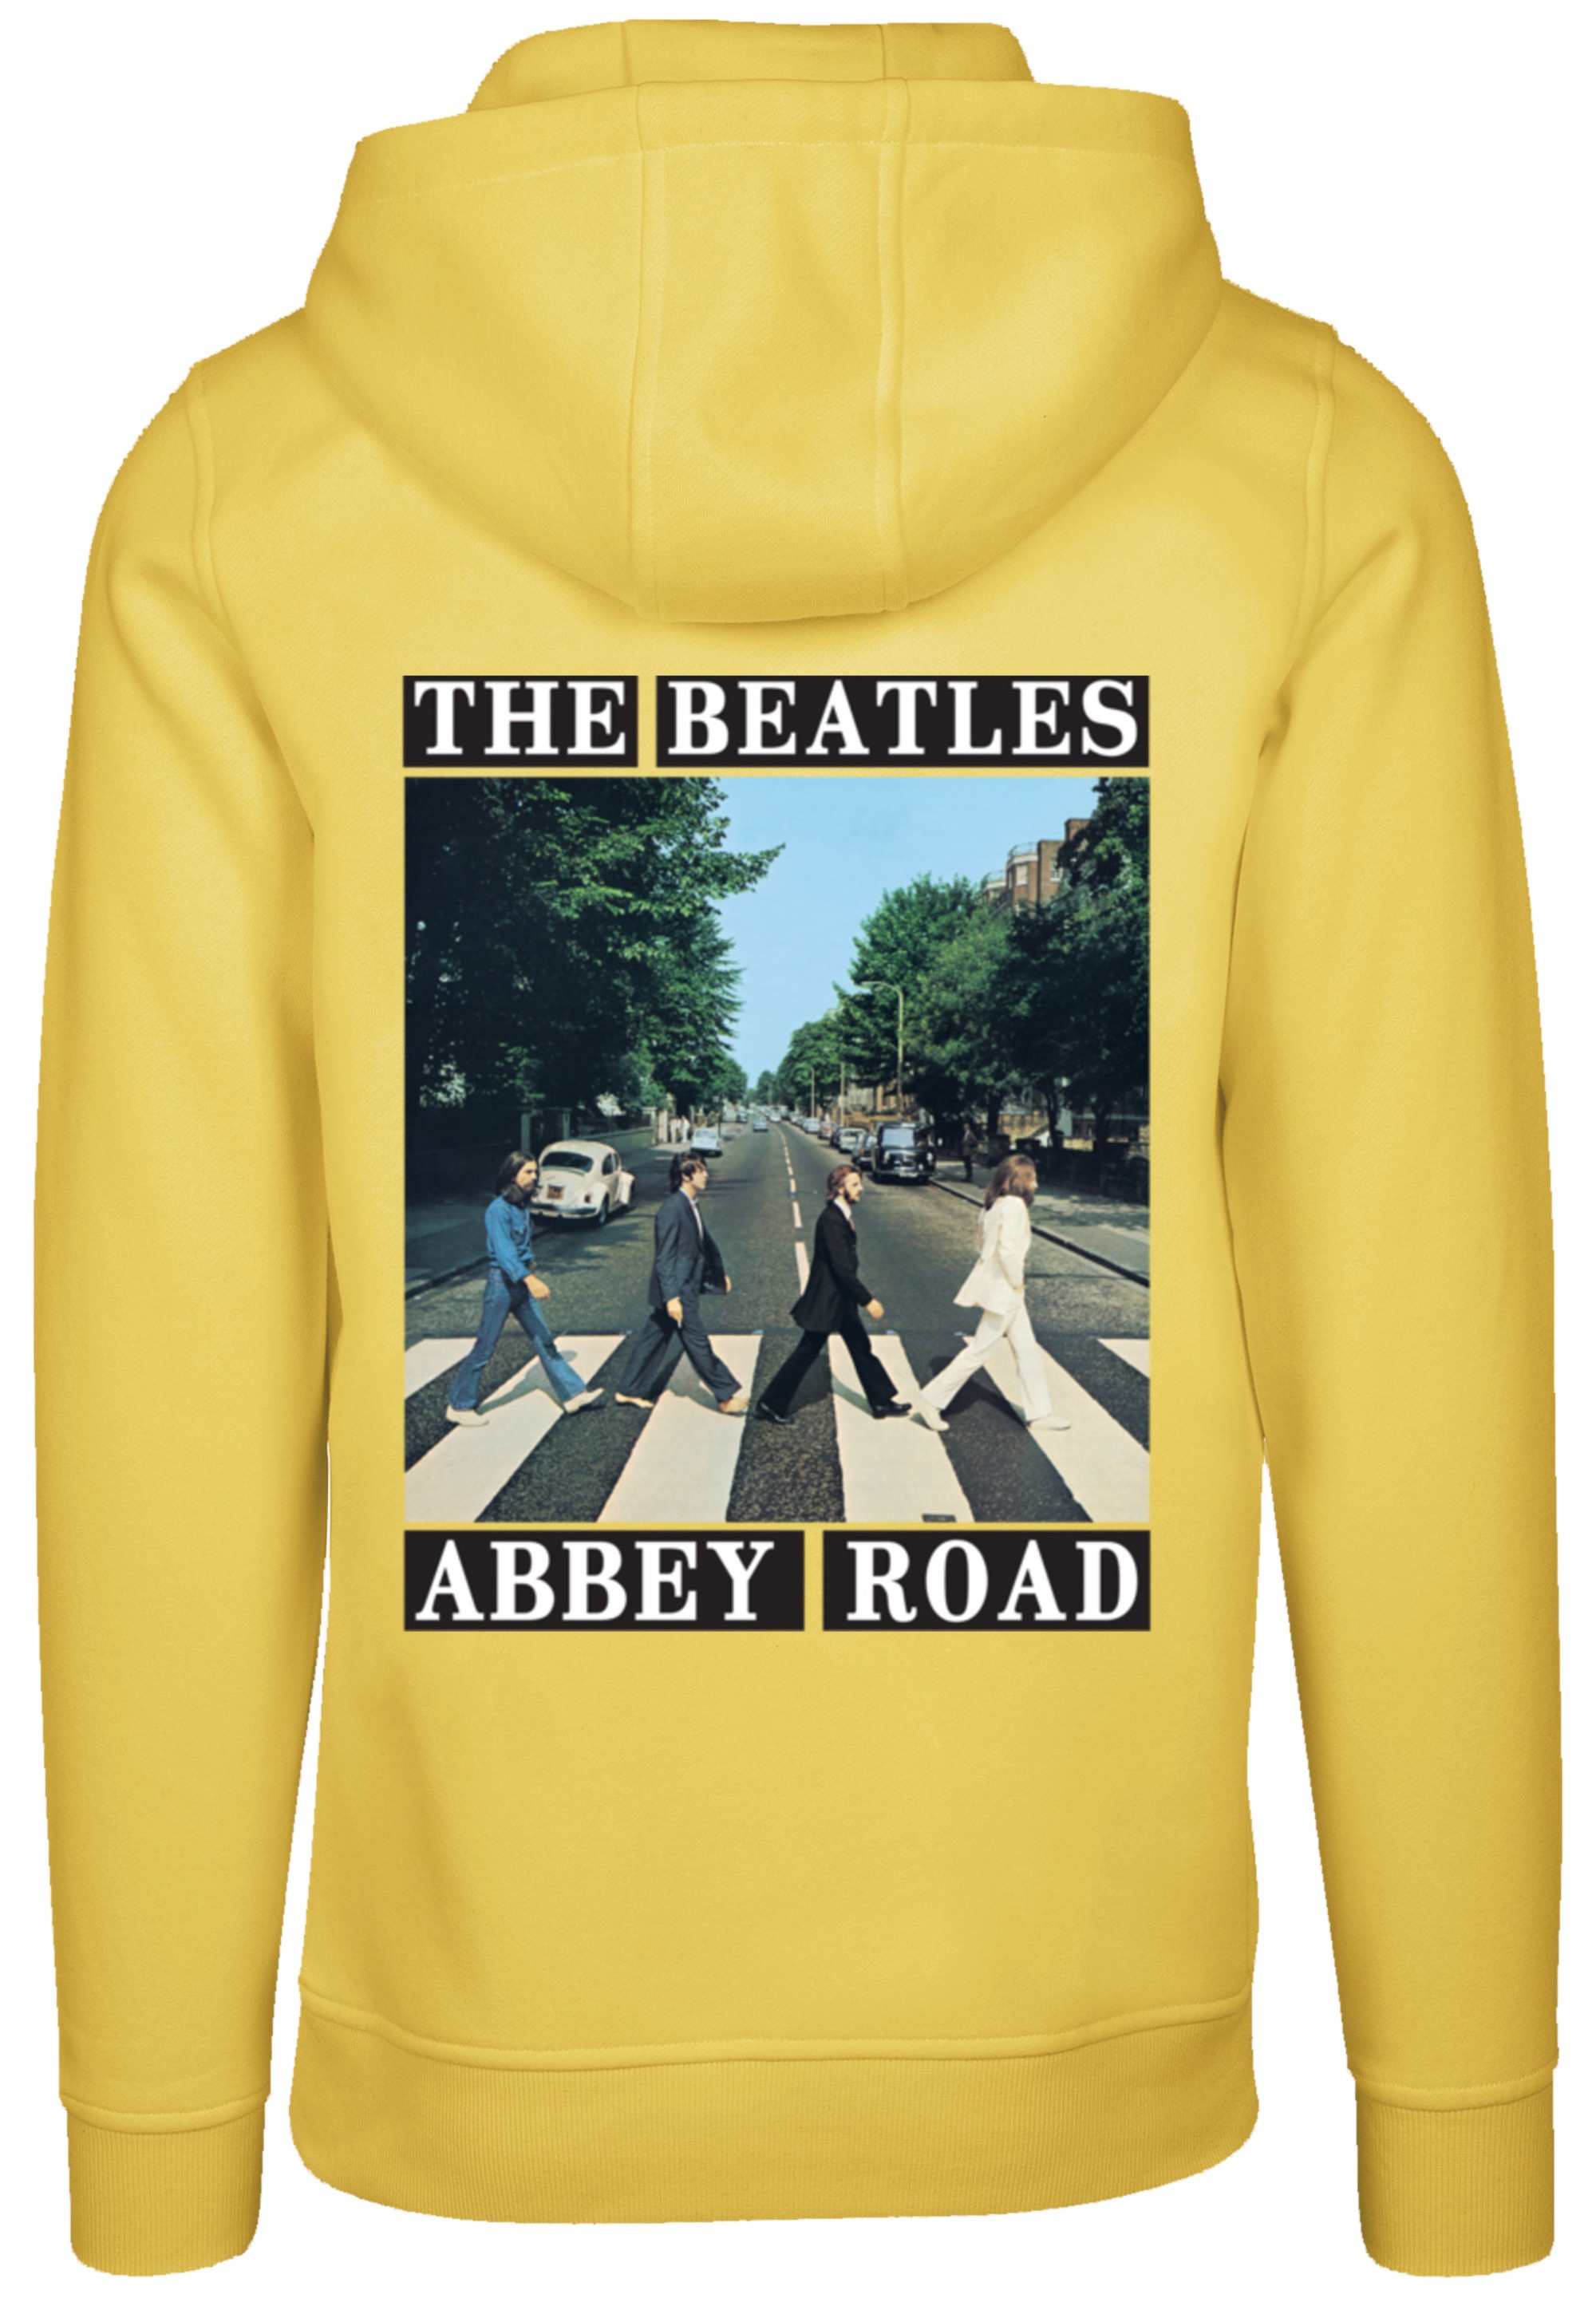 F4NT4STIC Kapuzenpullover »The Beatles Abbey Road Rock Musik Band«, Hoodie,  Warm, Bequem | I\'m walking